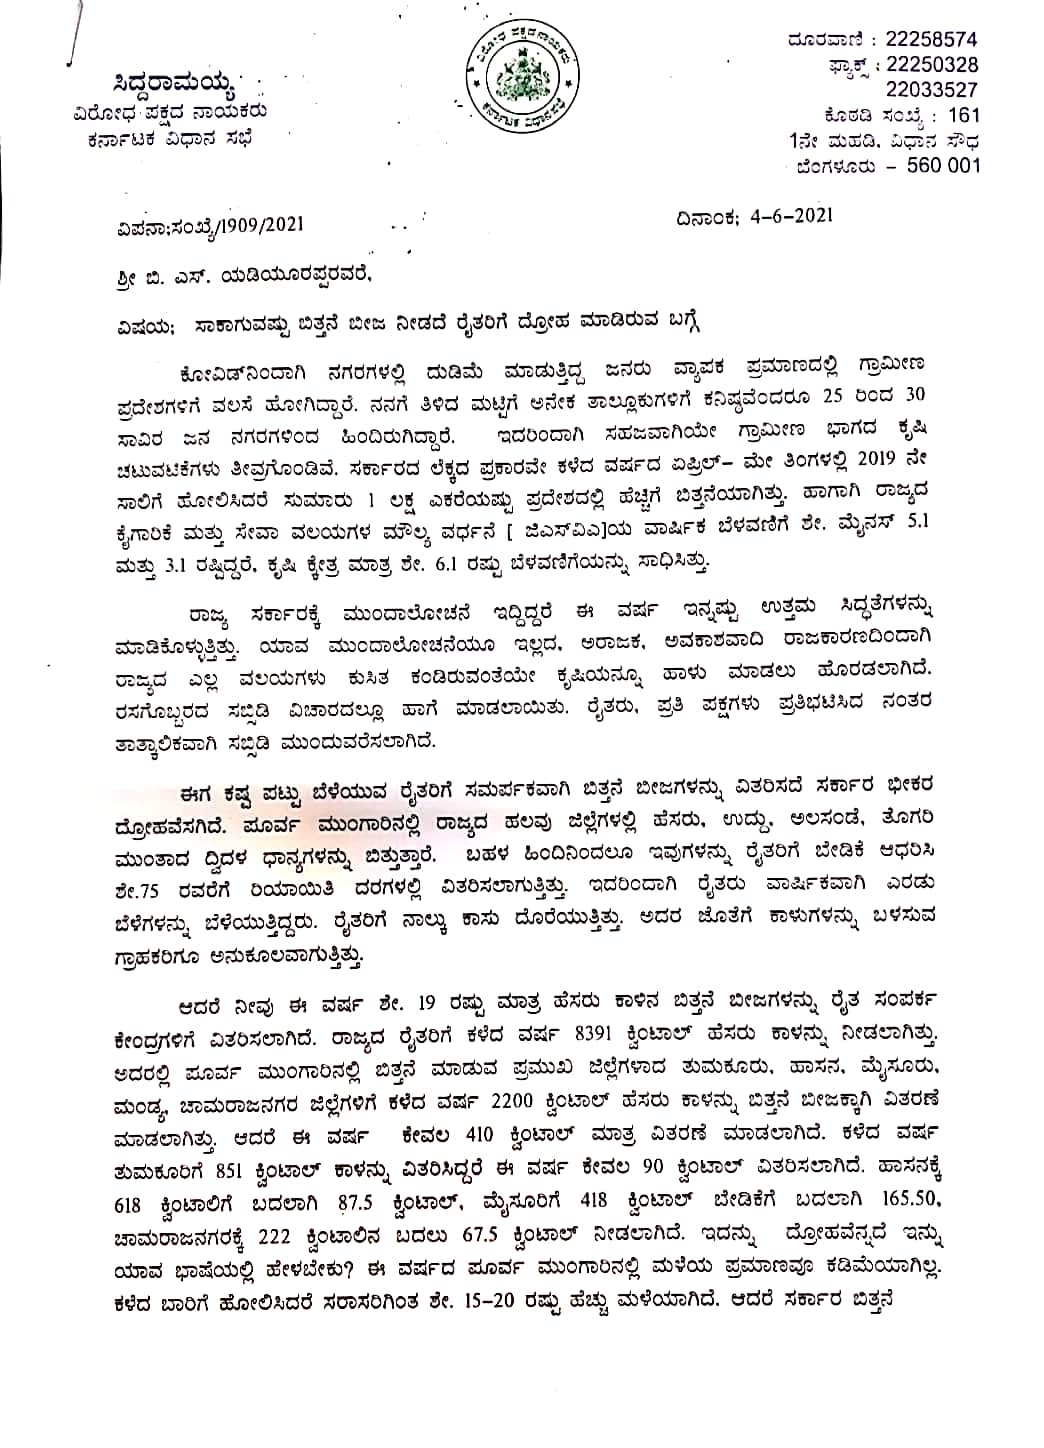 Siddaramaiah  wrote letter to CM